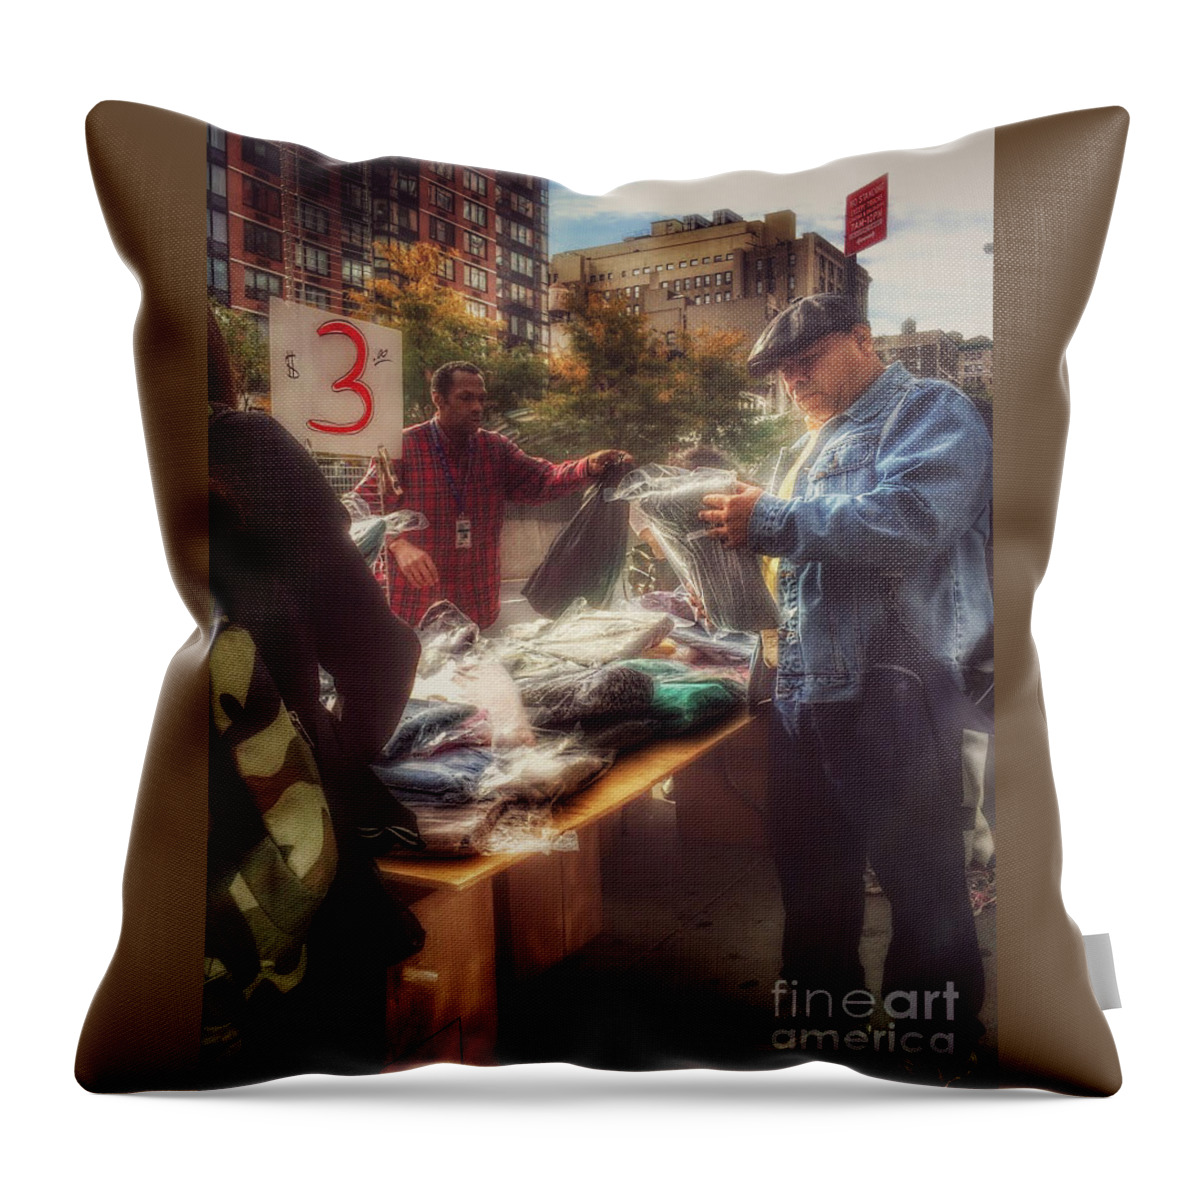 The Bargaining Table - Street Vendors Of New York Throw Pillow featuring the photograph The Bargaining Table - Street Vendors of New York by Miriam Danar